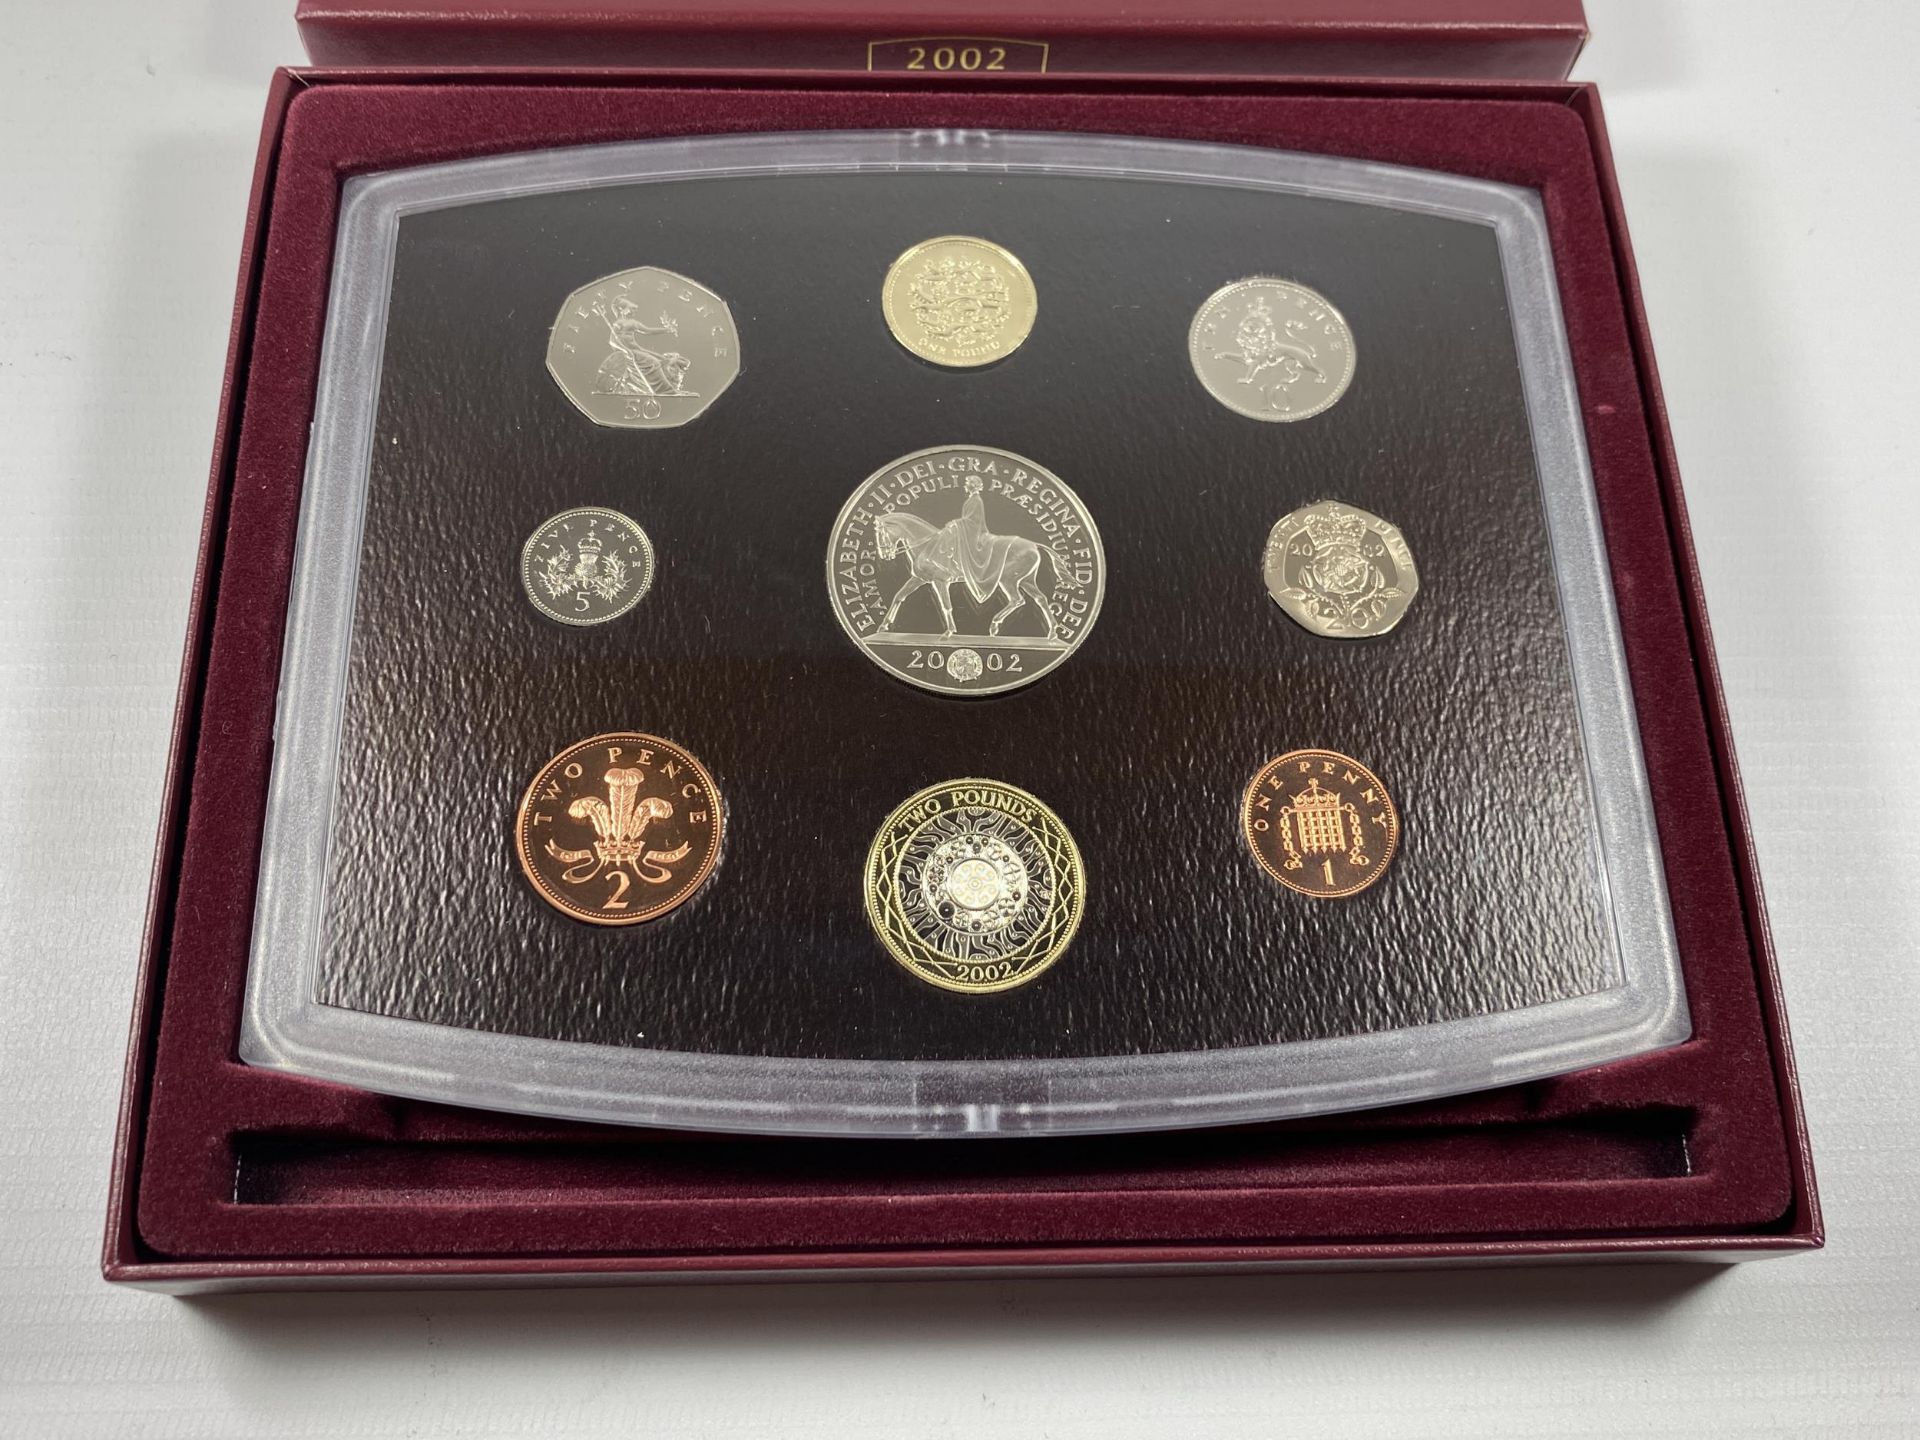 A 2002 ROYAL MINT CASED PROOF COIN SET - Image 2 of 3